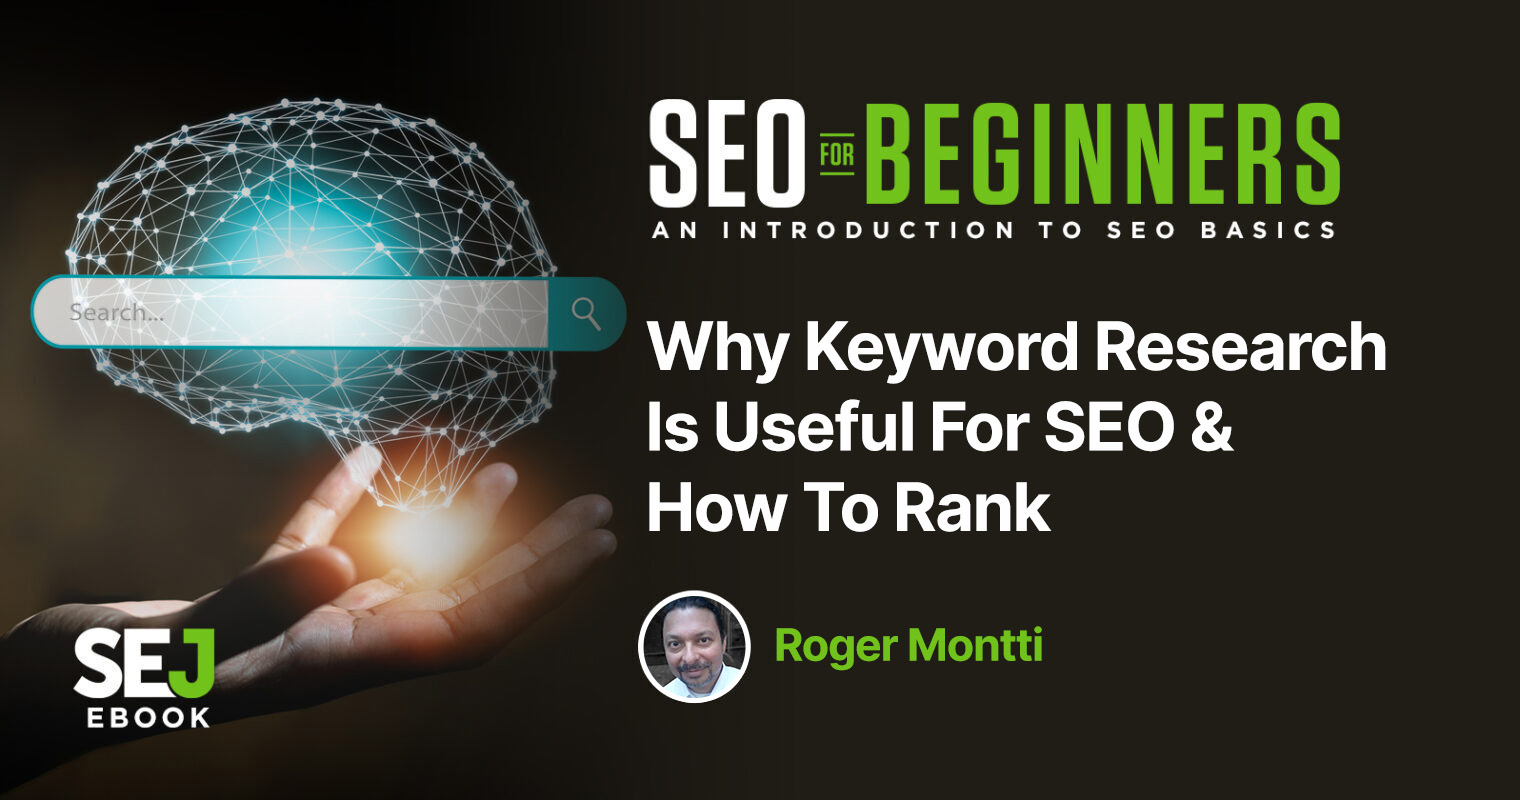 Why Keyword Research Is Useful For SEO & How To Rank via @sejournal, @martinibuster